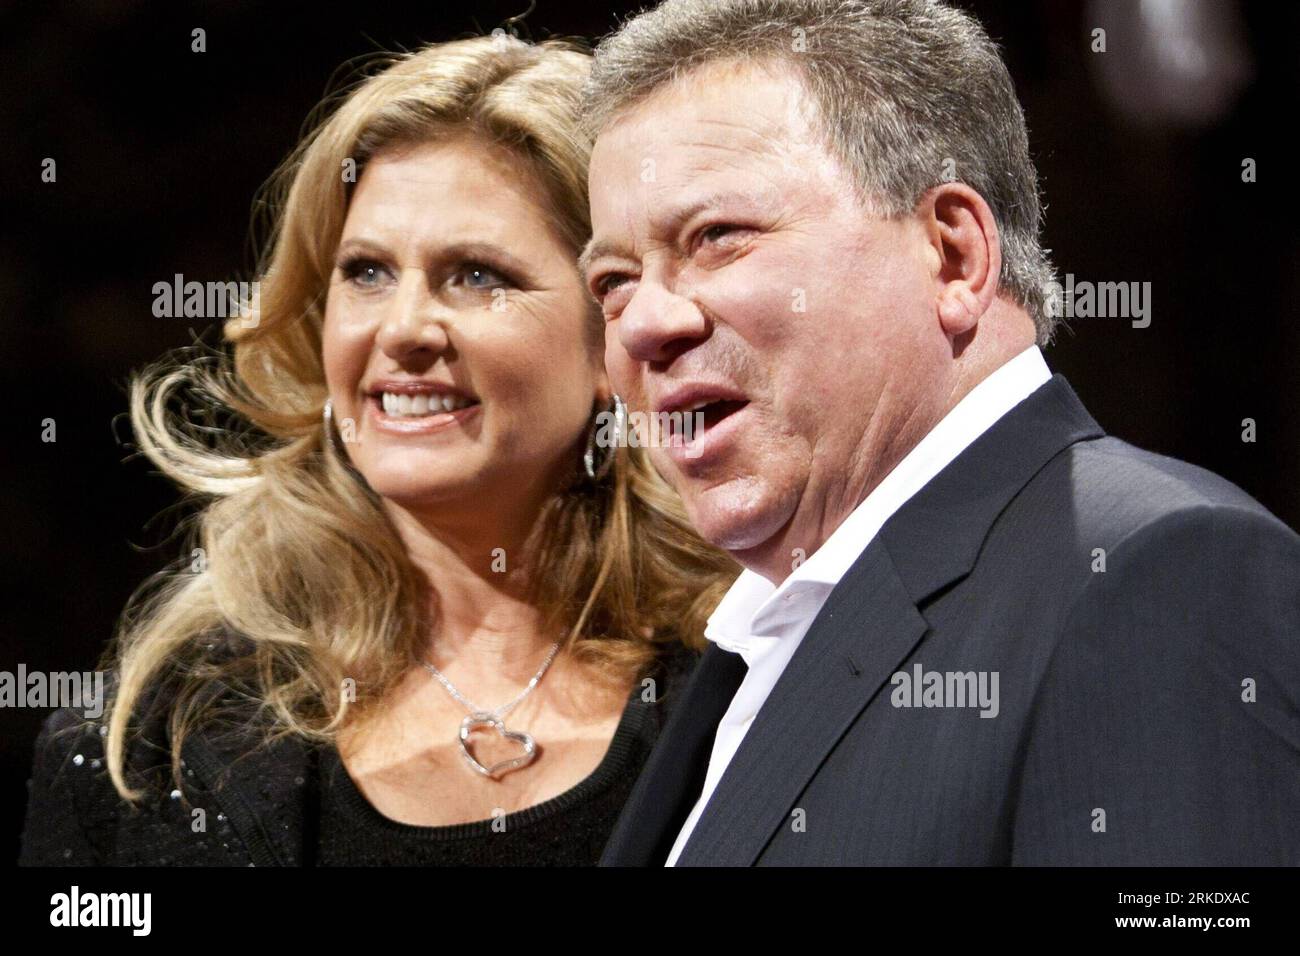 110311 -- OTTAWA, March 11, 2011 Xinhua -- Host William Shatner R walks the red carpet with his wife Elizabeth prior to the 31st Genie Awards at the National Arts Centre in Ottawa, Ontario, Canada, on March 10, 2011. The Genie Awards celebrate the achievements of the Canadian cinema industry. Xinhua/Christopher Pike CANADA-GENIE-CINEMA AND TELEVISION AWARDS PUBLICATIONxNOTxINxCHN Stock Photo